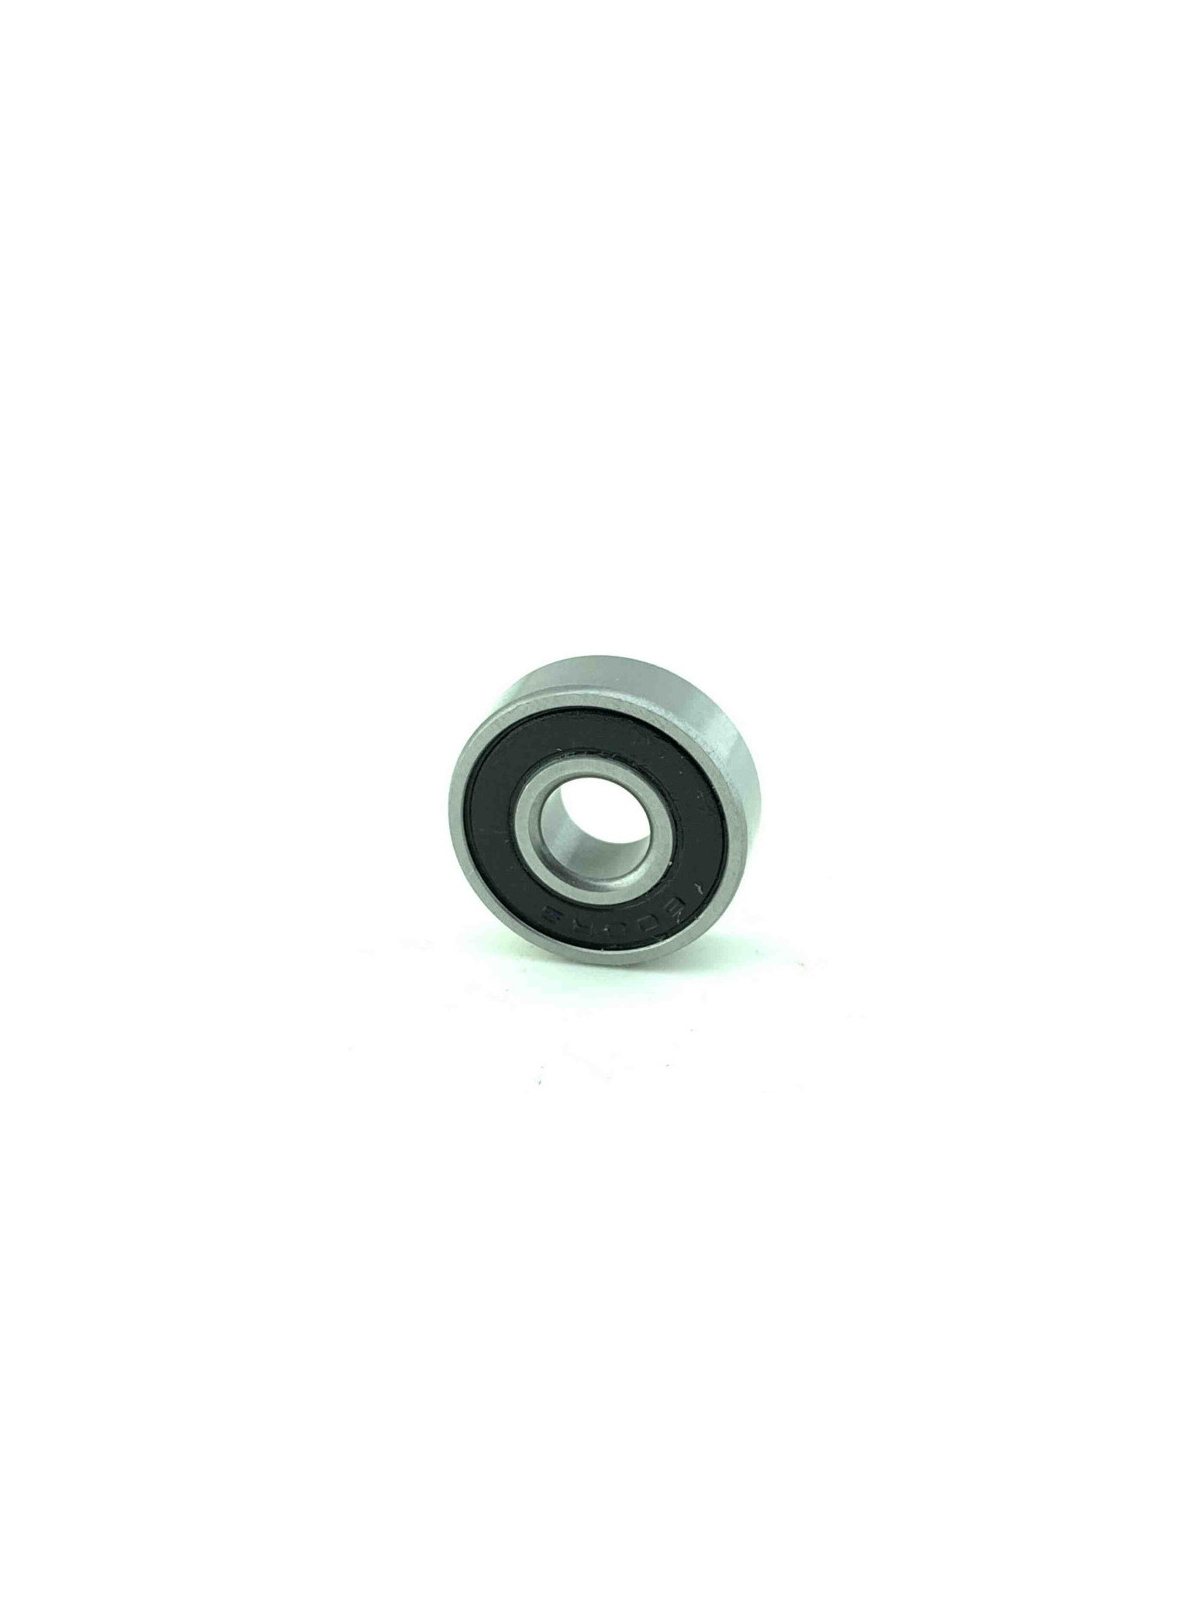  Bearing 608 2RS 8 x 22 x 7 mm  stainless steel | JVL-Europe